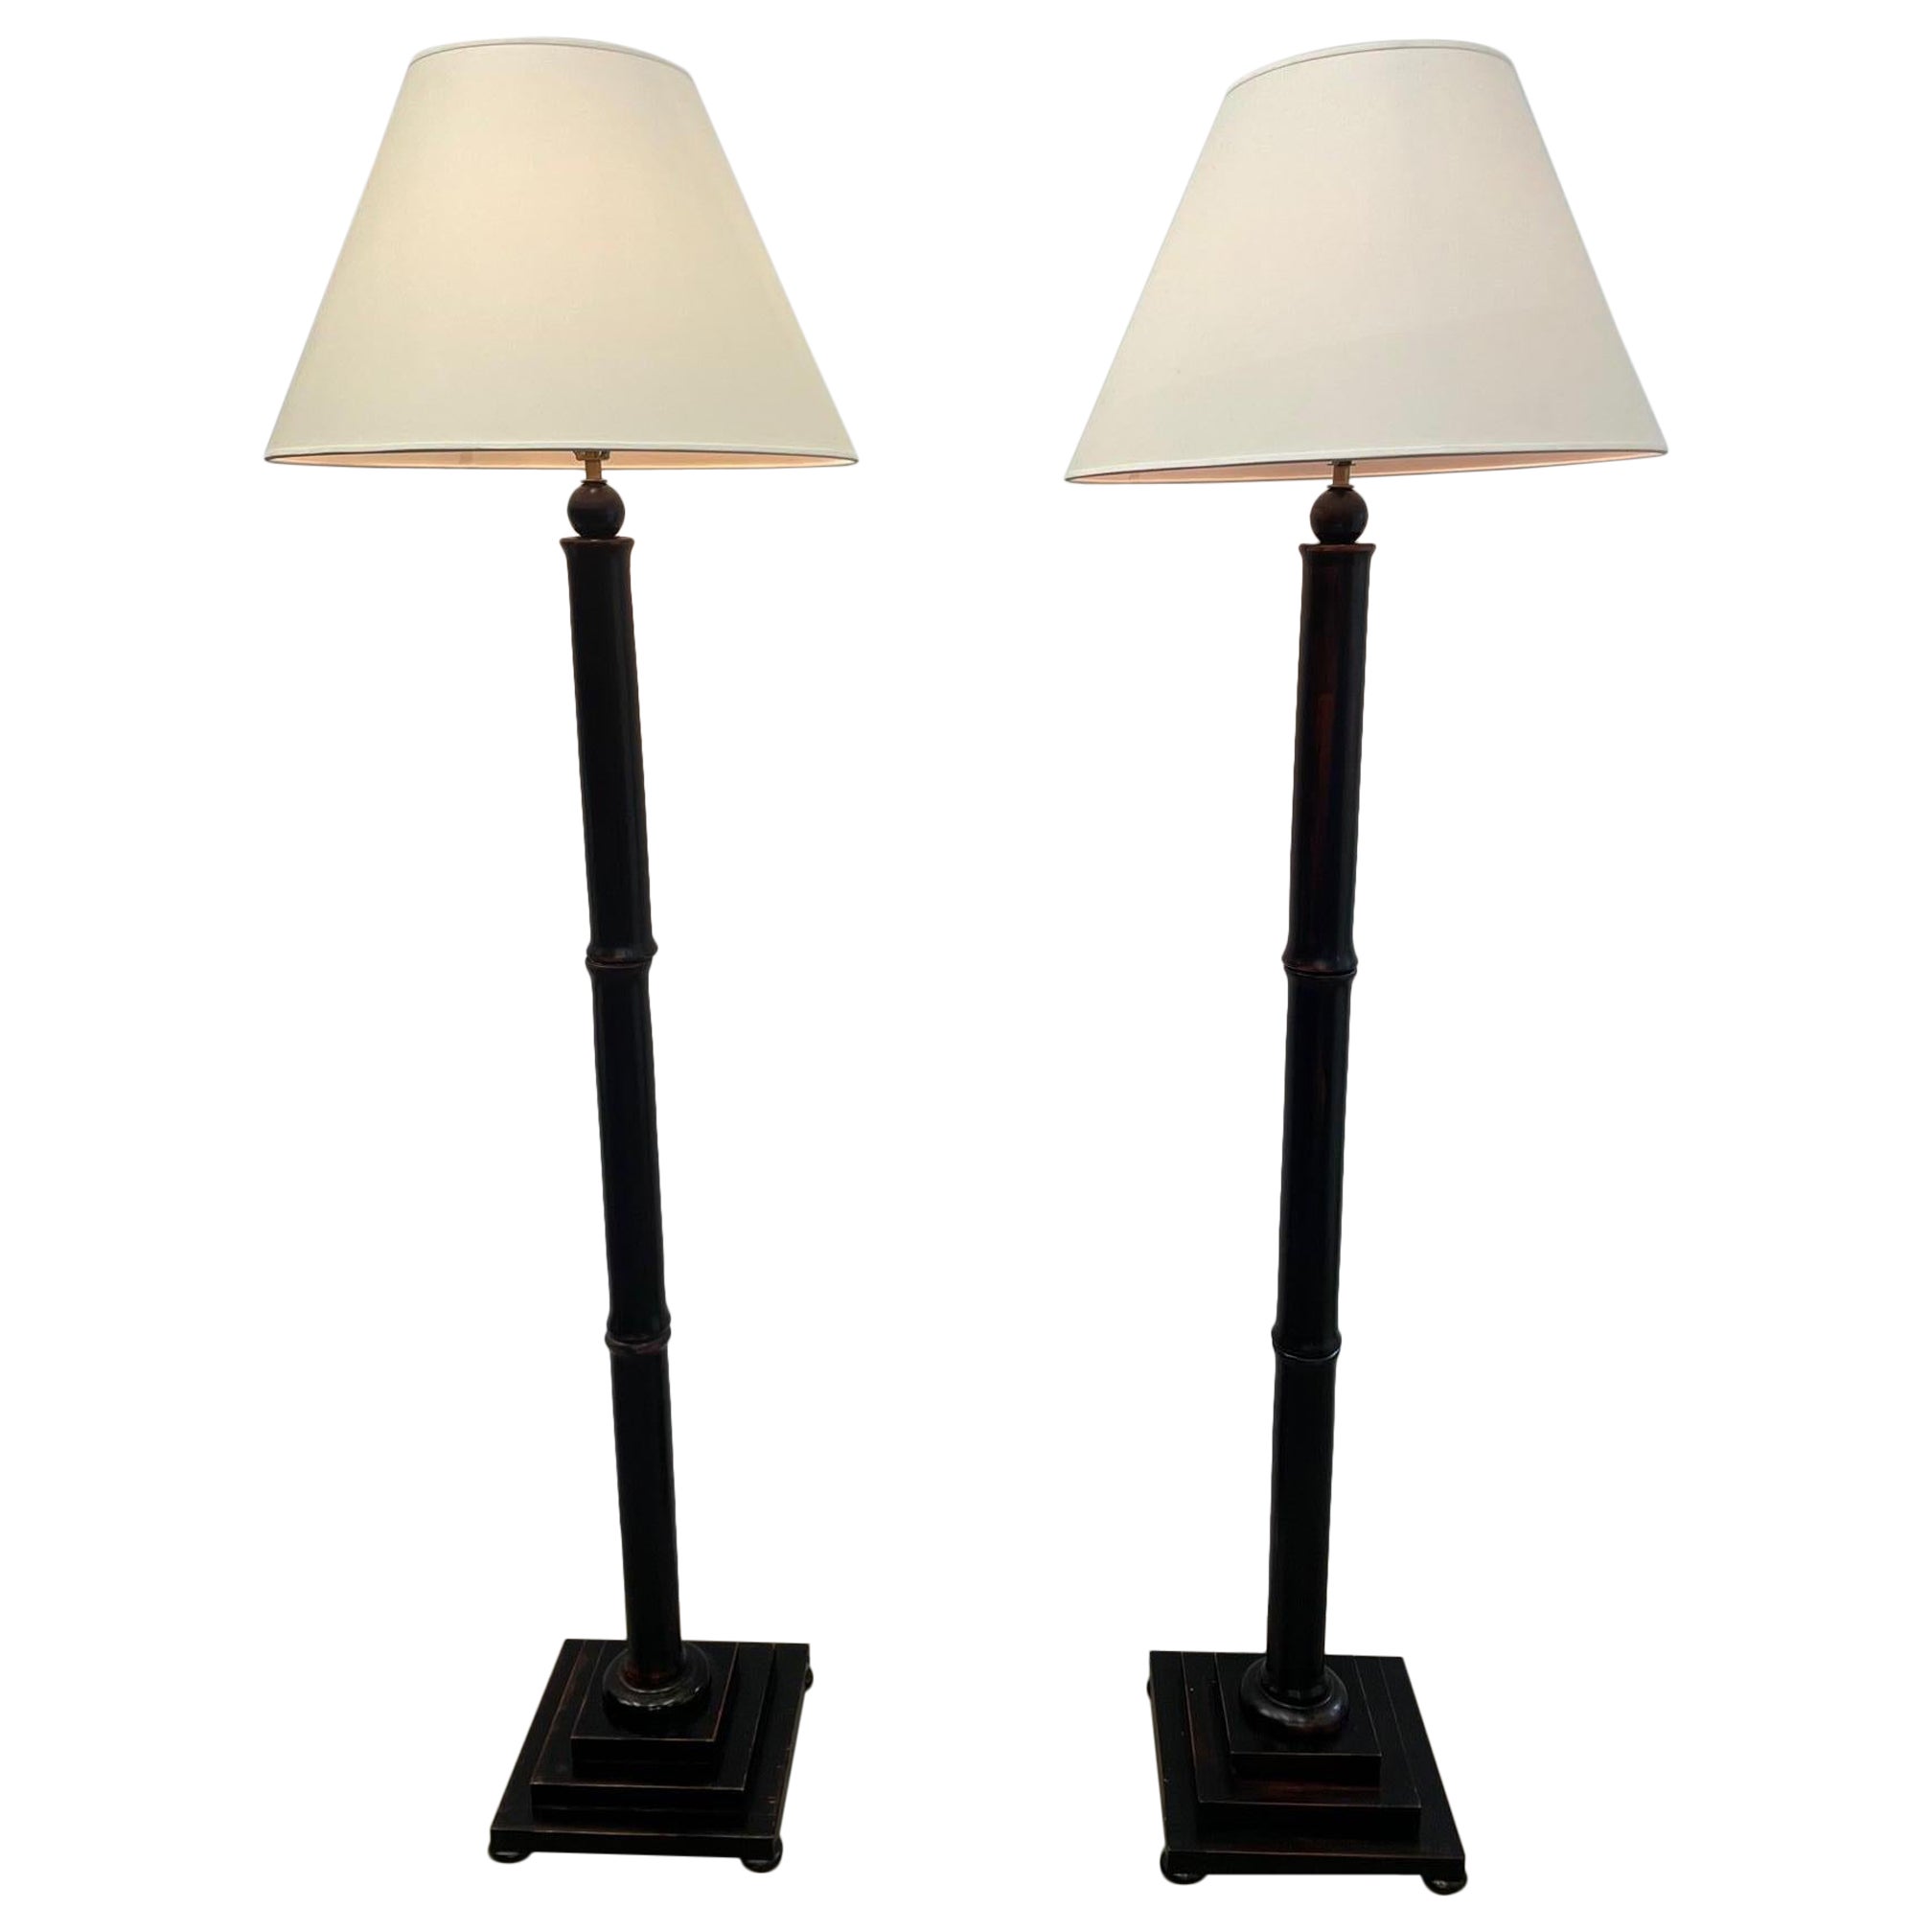 Stunning Pair of Faux Bamboo Wooden Floor Lamps with Black Finish For Sale